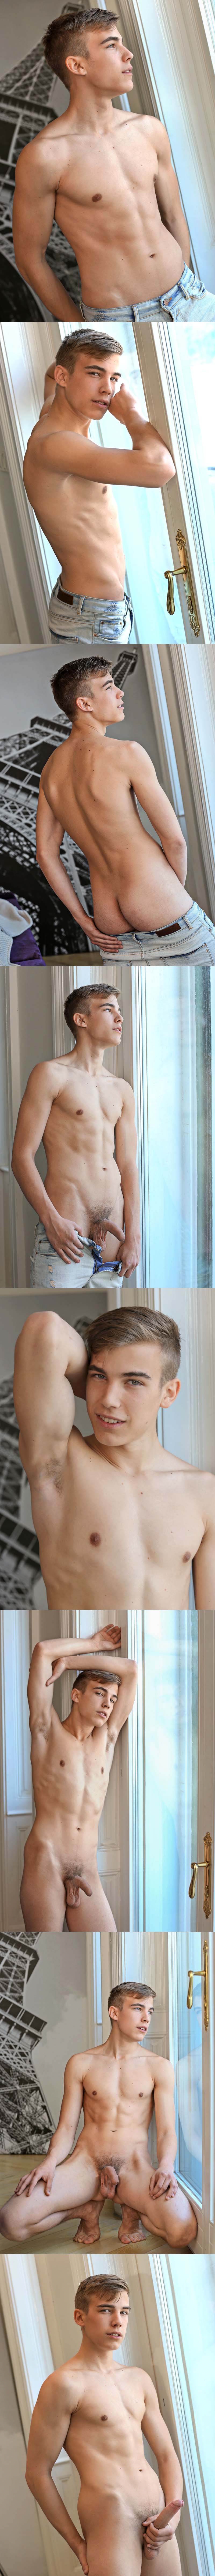 Gerry Woodward [Model of the Week] at BelAmiOnline.com